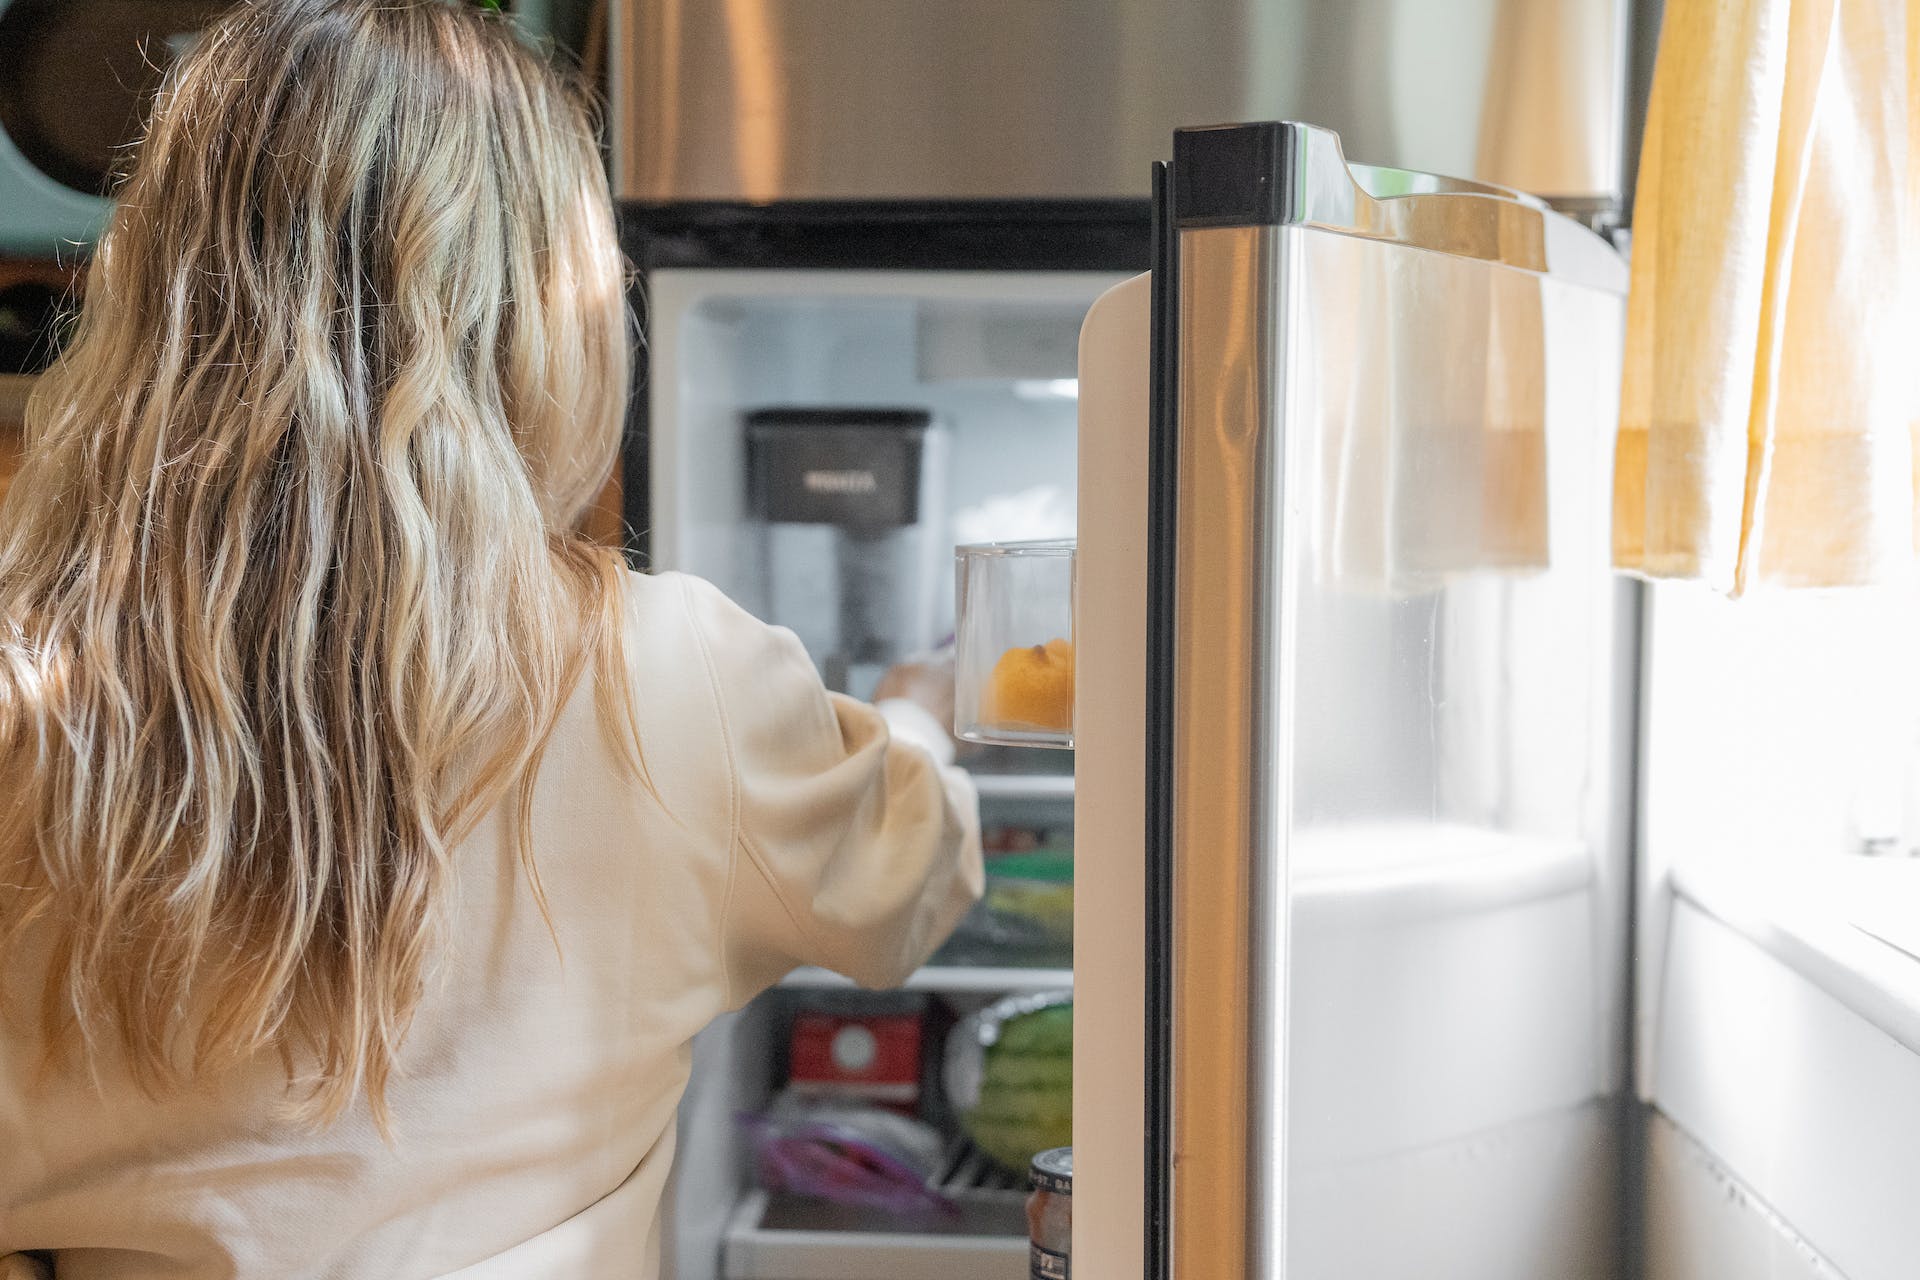 Person standing in front of fridge | Source: Pexels